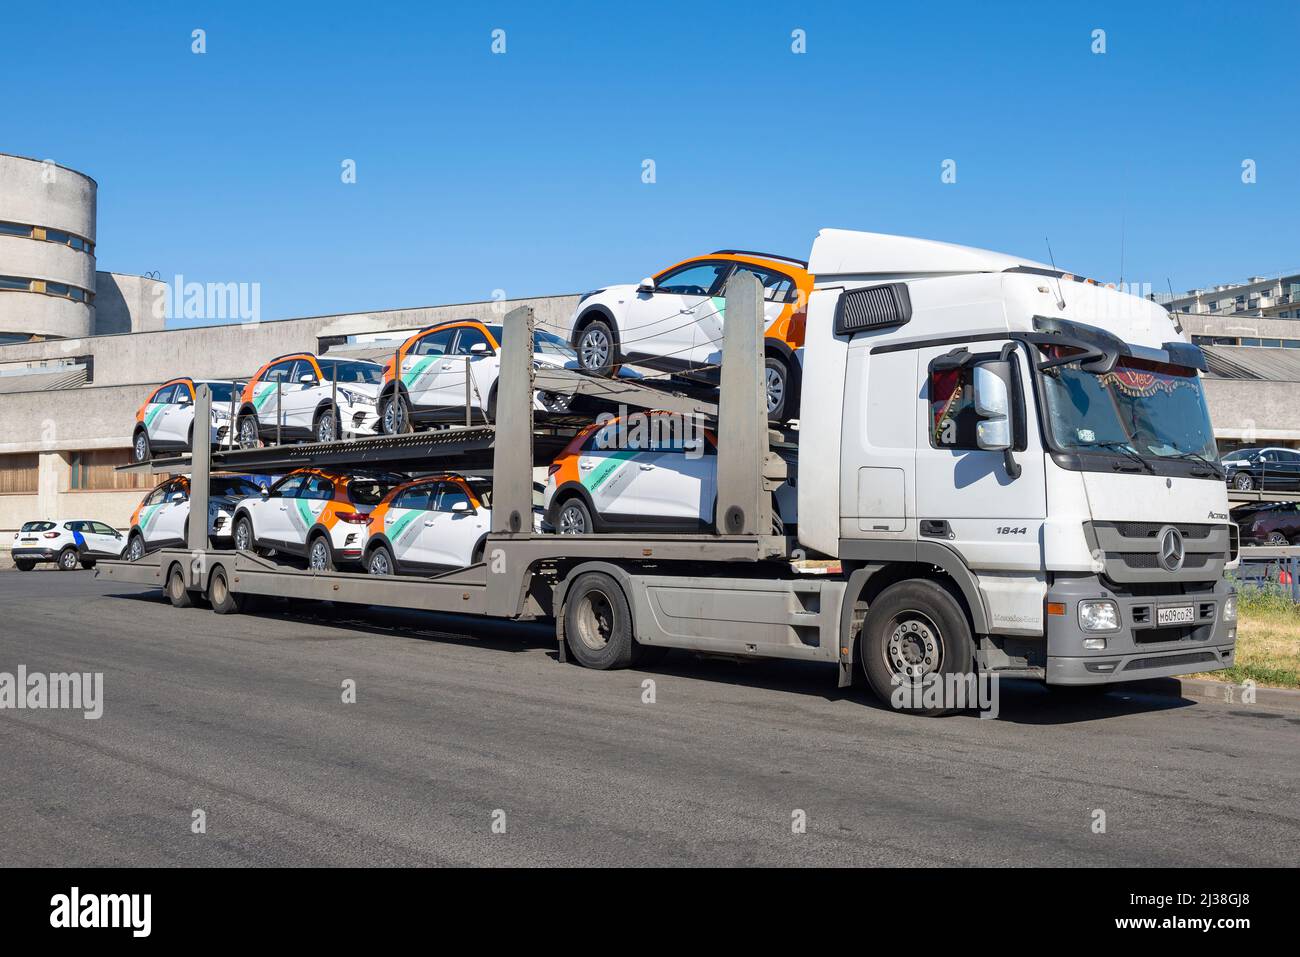 SAINT PETERSBURG, RUSSIA - JULY 17, 2021: A car carrier with new cars of the Delimobil carsharing company close-up. Saint-Petersburg Stock Photo